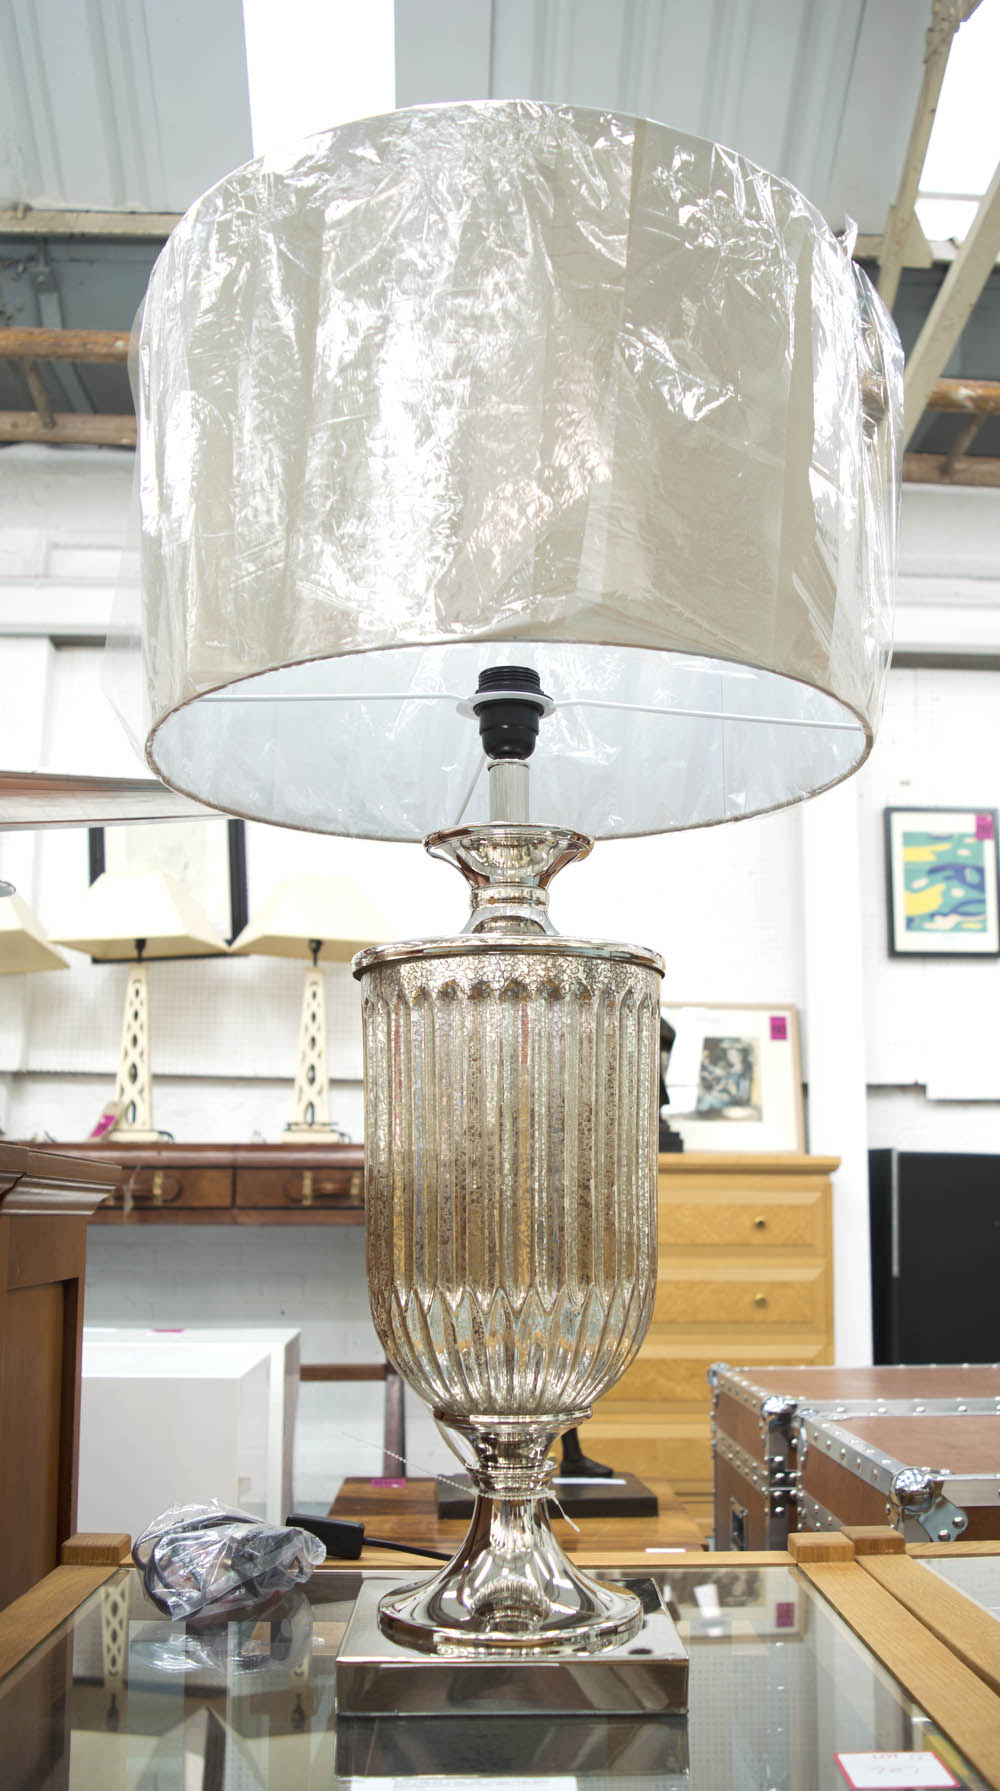 TABLE LAMP, Designer style, plated metal and glass base, round satin shade, 85cm H, shade 46cm diam.